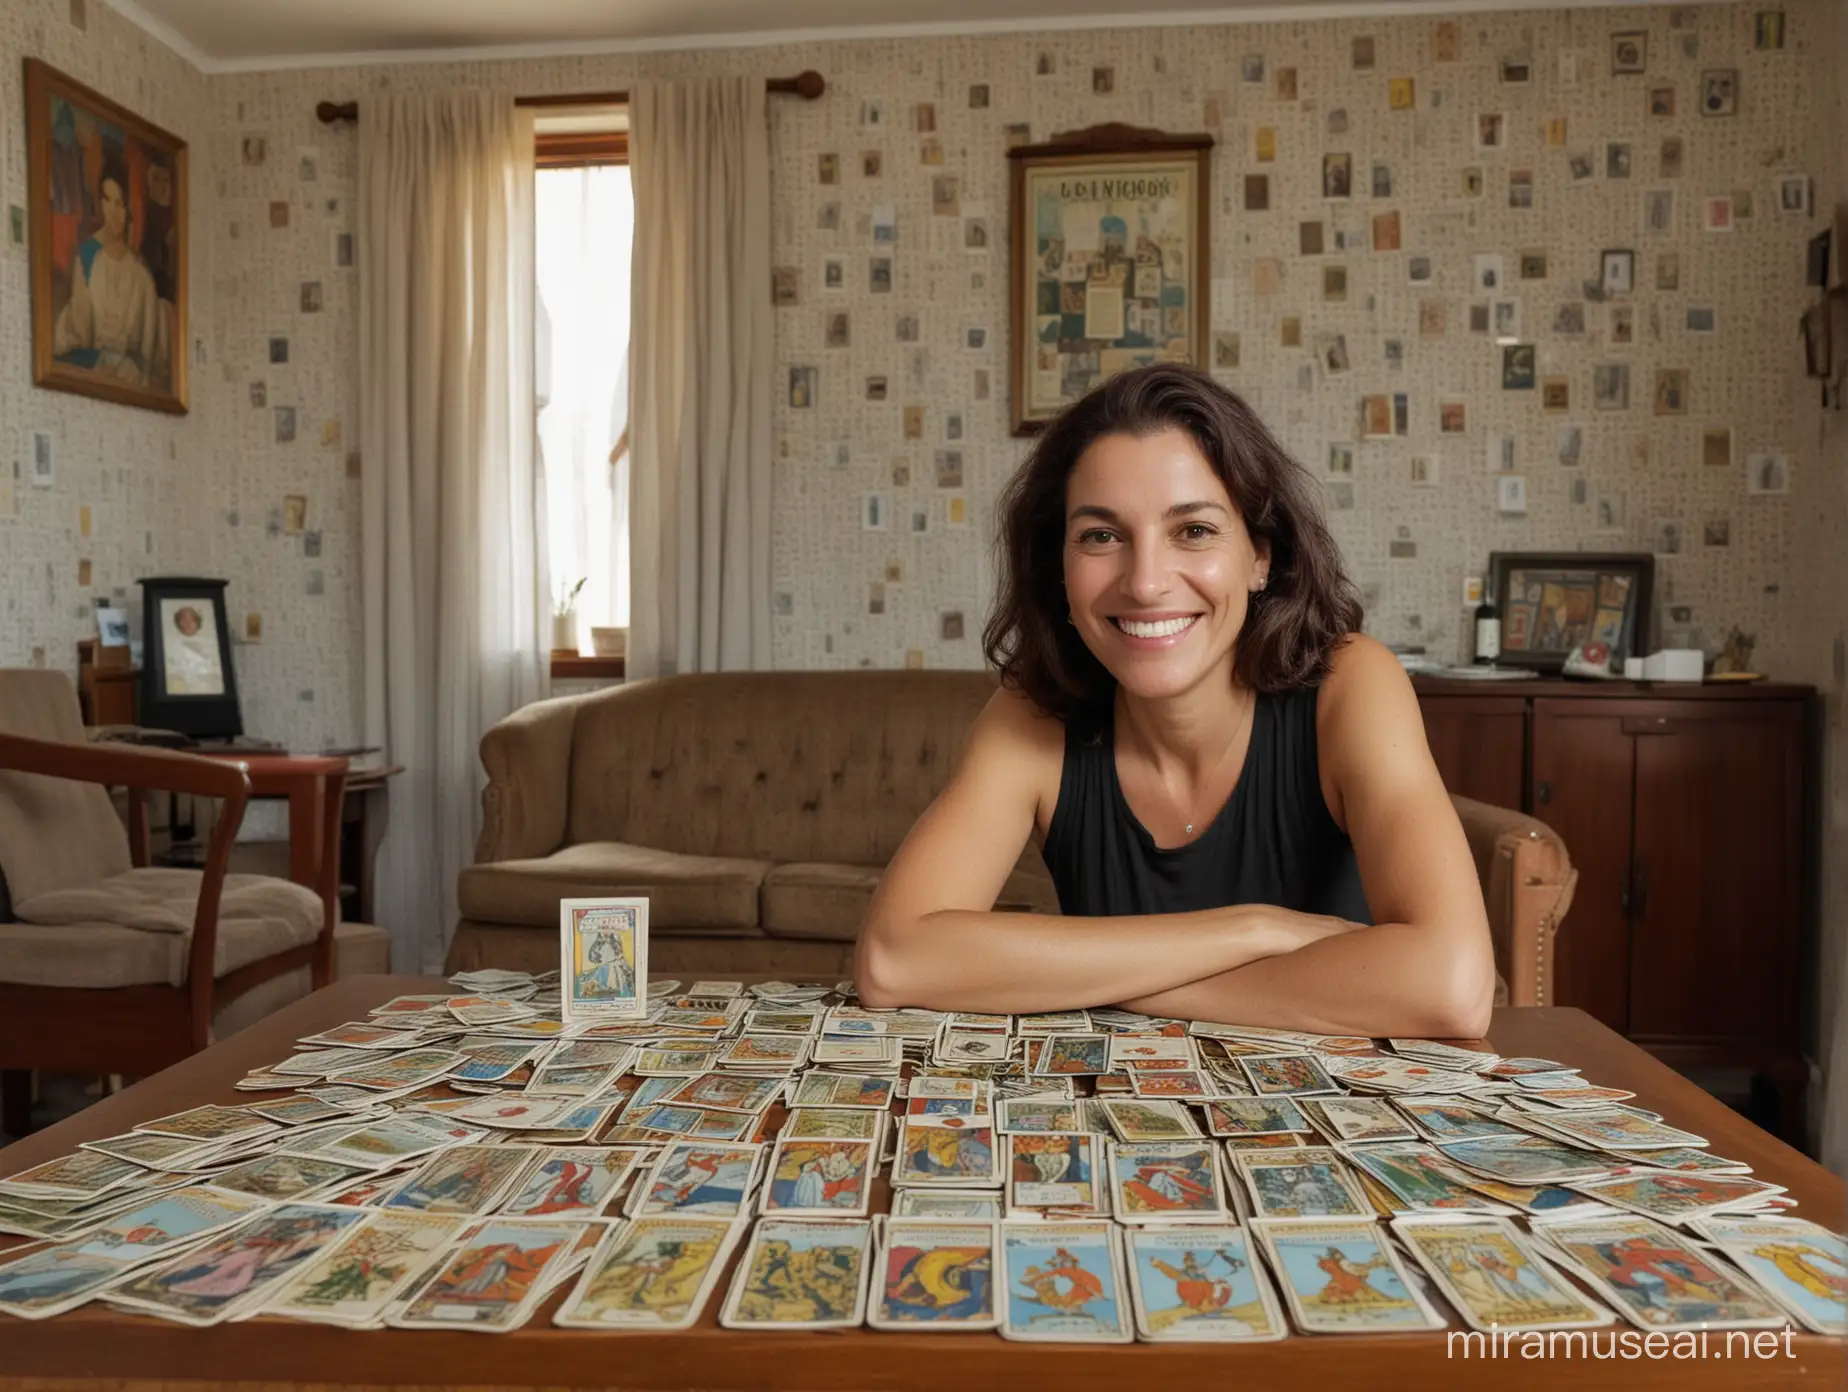 Brazilian Woman Smiling with Tarot Cards in Simple Living Room Setting